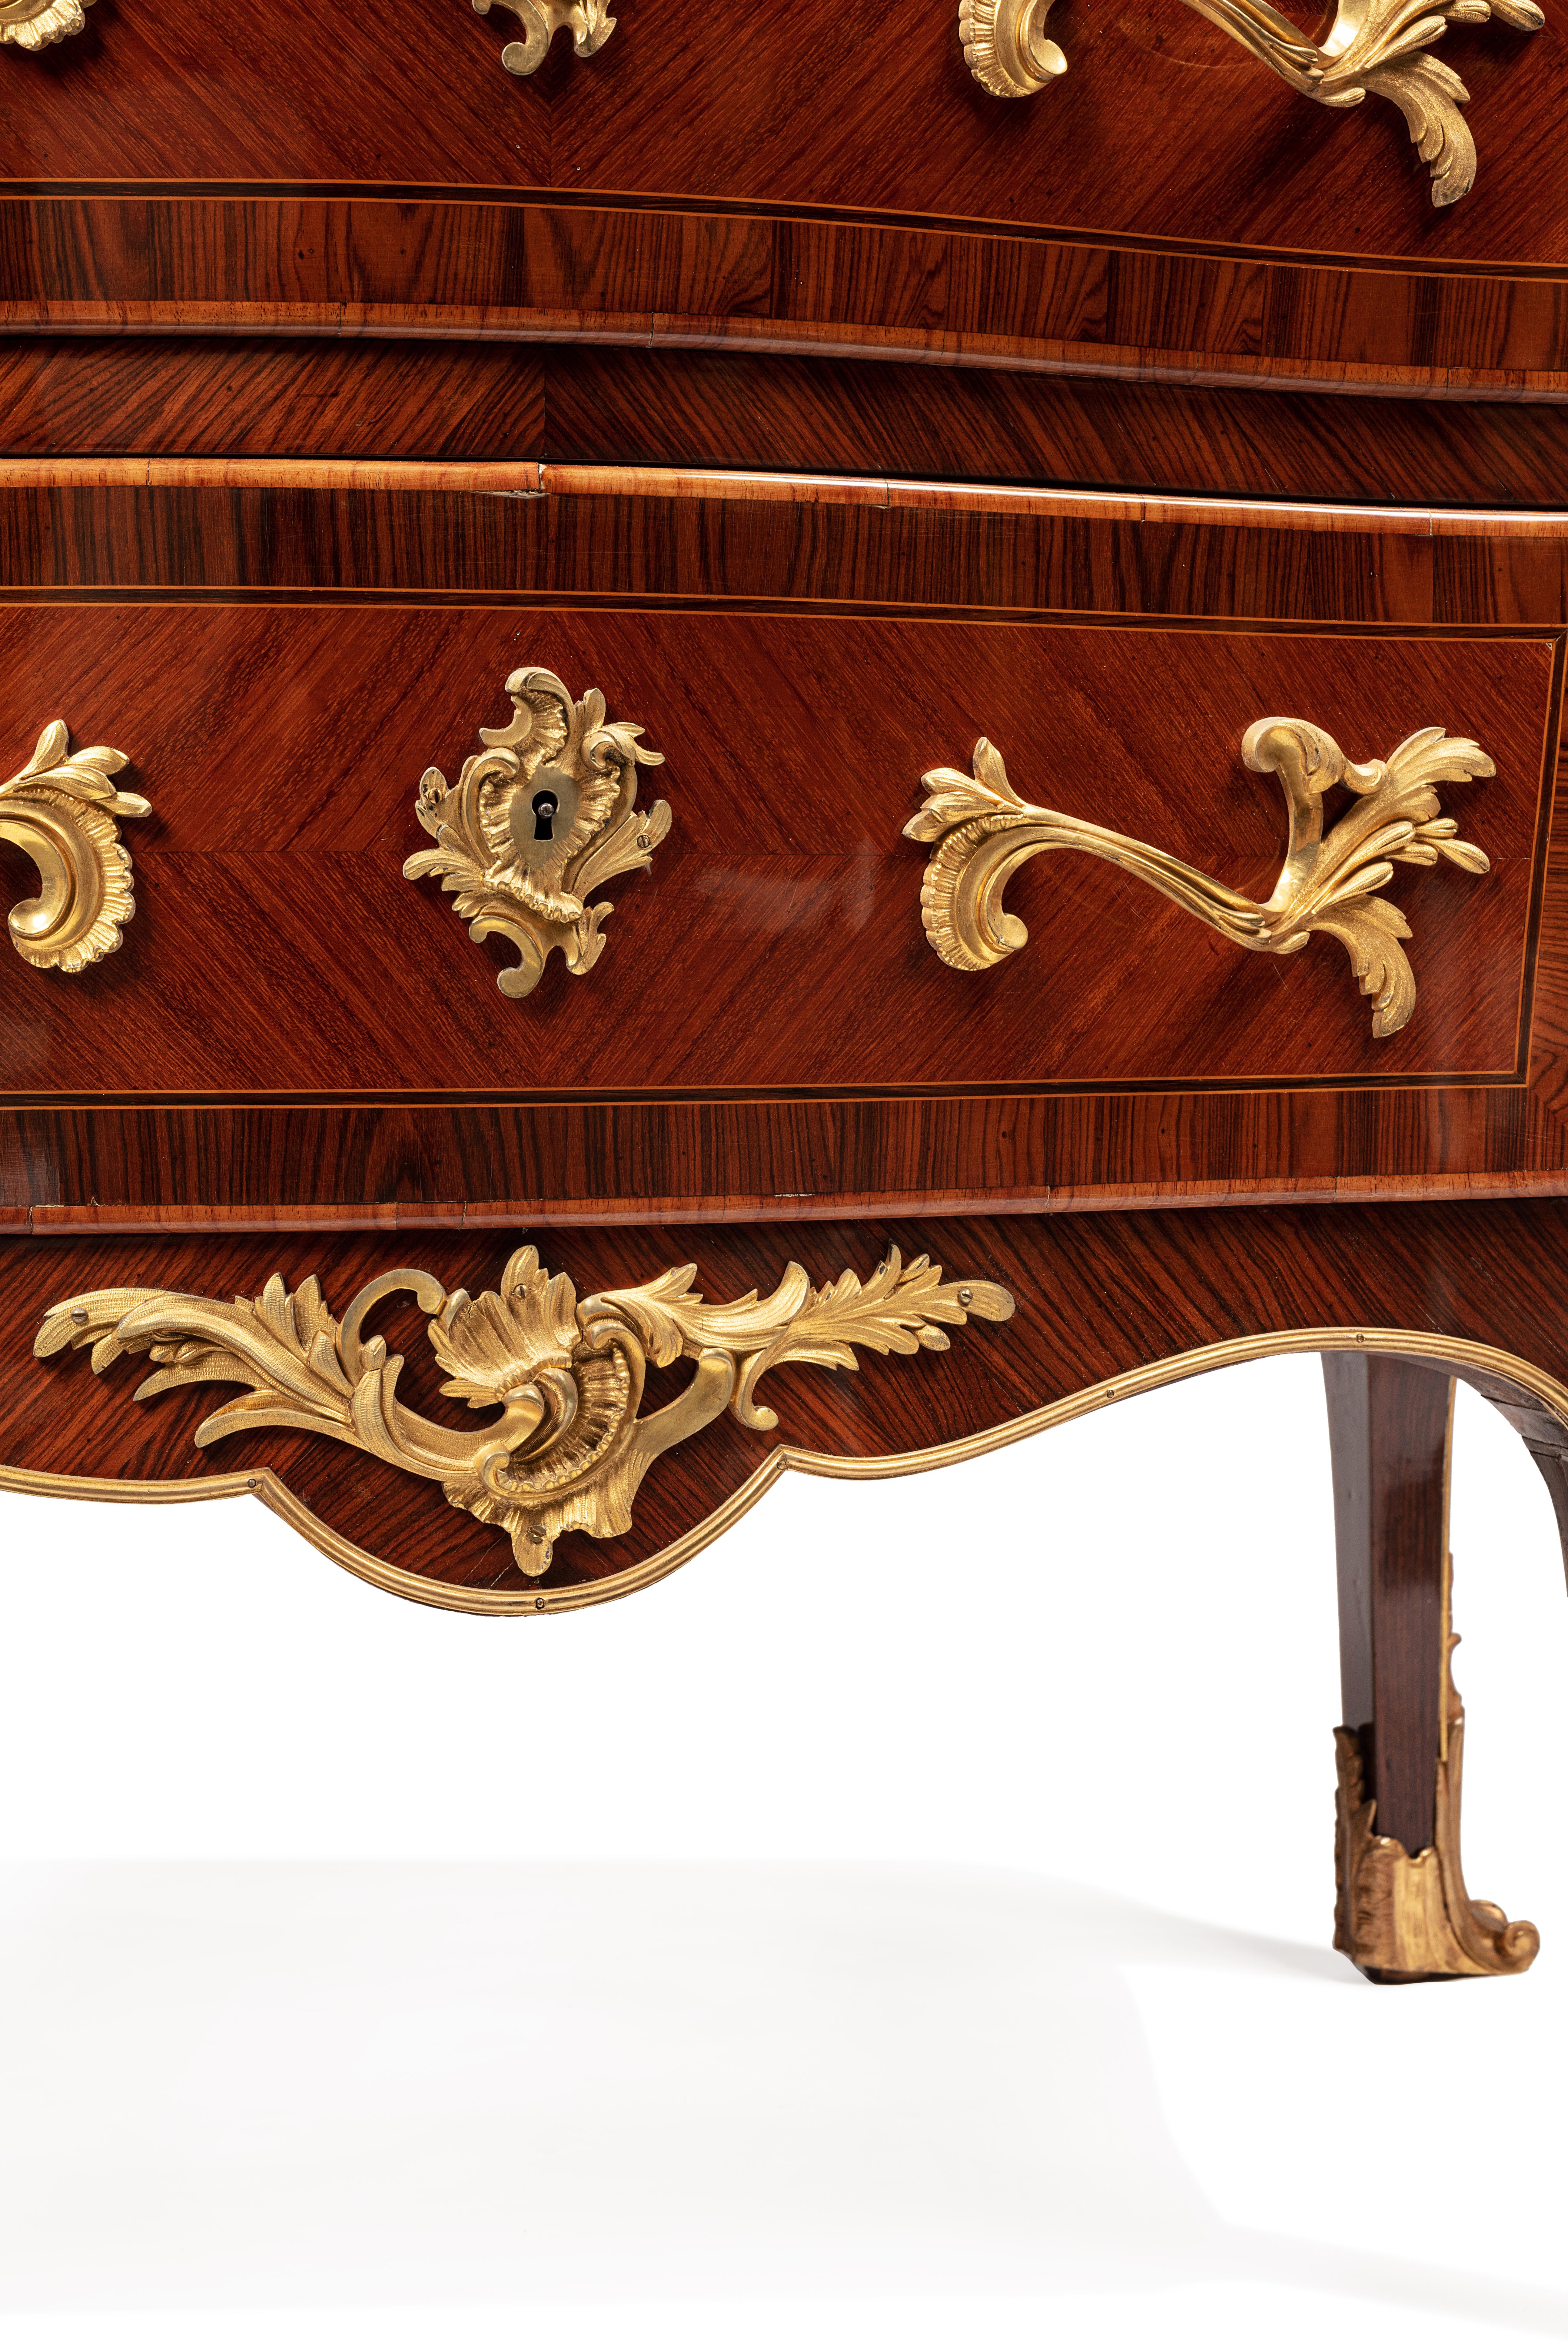 Extremely high end louis XV style chest of drawers 
in marquetry ,marble top, ormolu bronze falls on the sides , finished with clogs on the front and back of the feet ,bear the mark on the sides  linke
